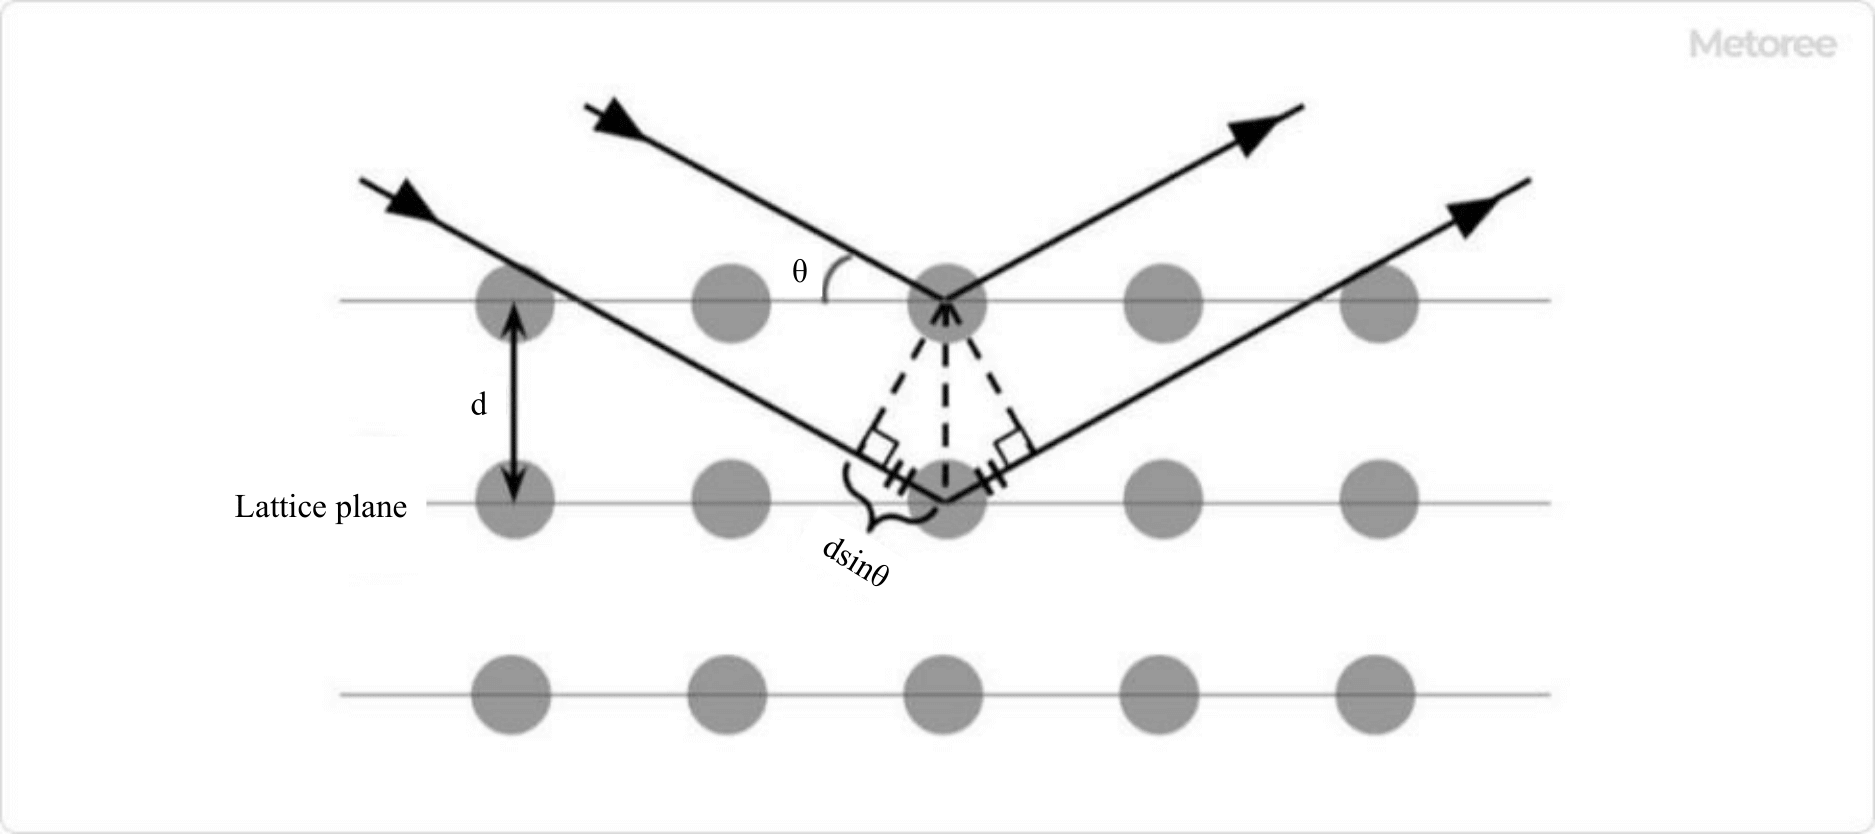 Figure 1. Diffraction conditions of Bragg